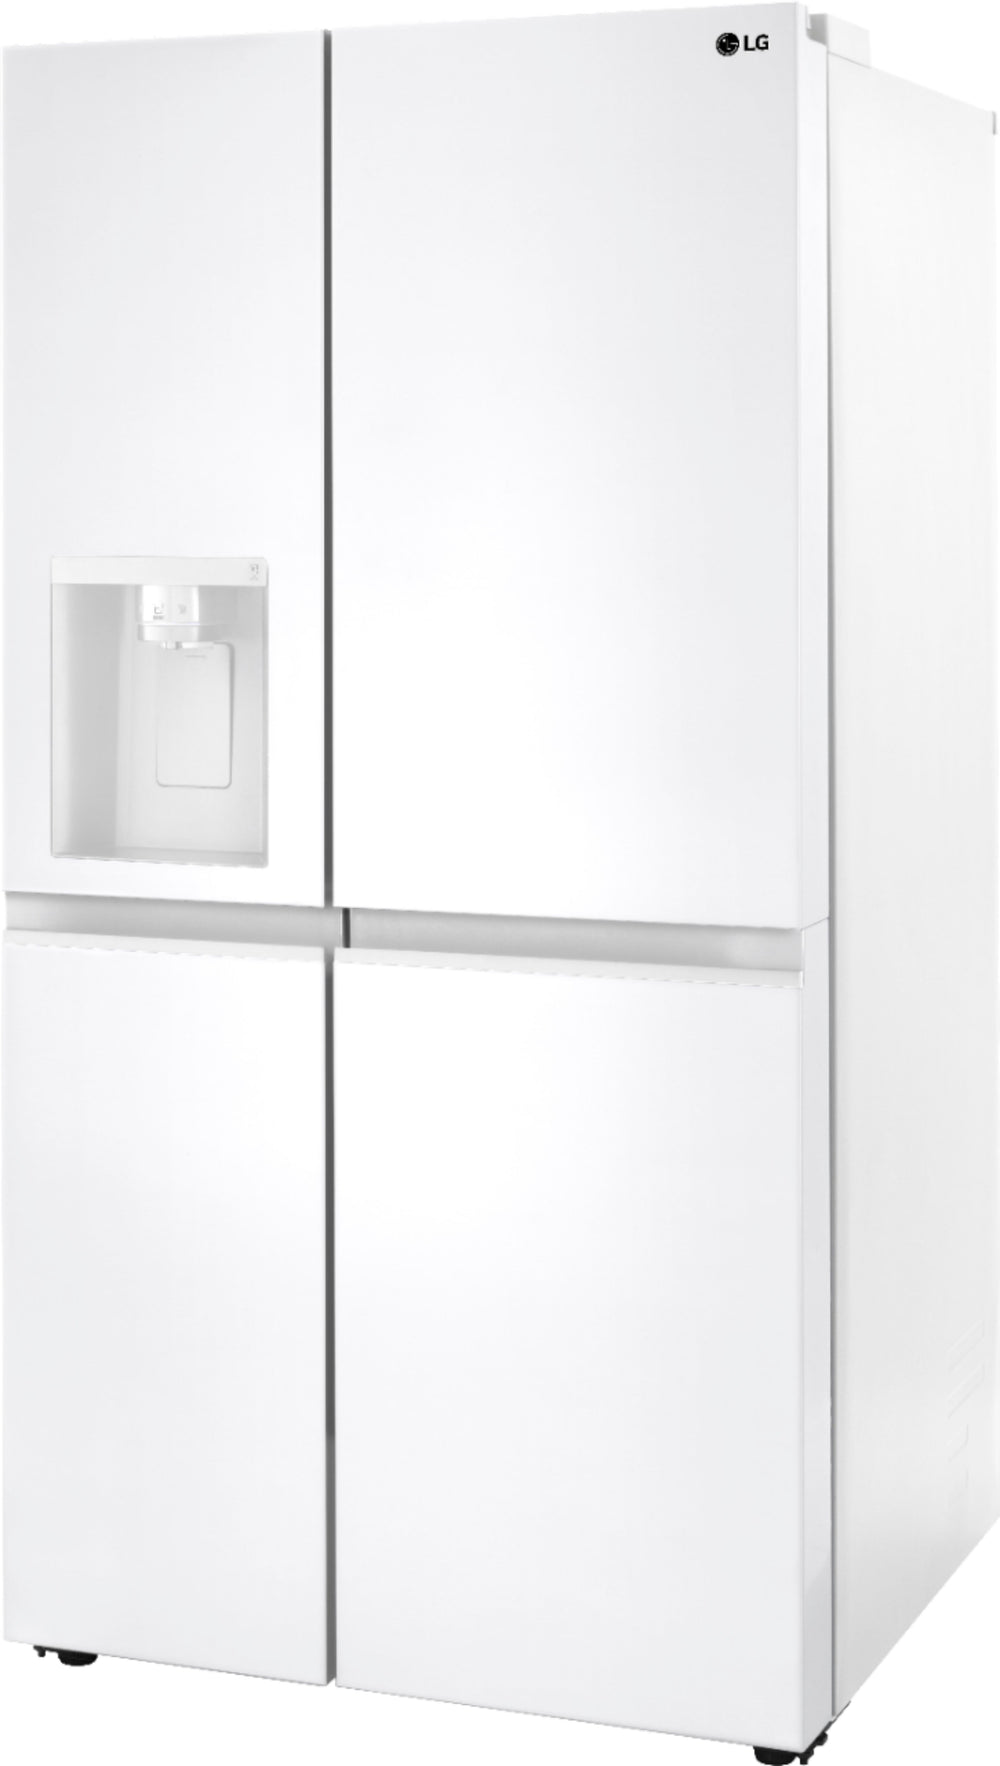 LG - 27.2 cu ft Side by Side Refrigerator with SpacePlus Ice - Smooth white_1